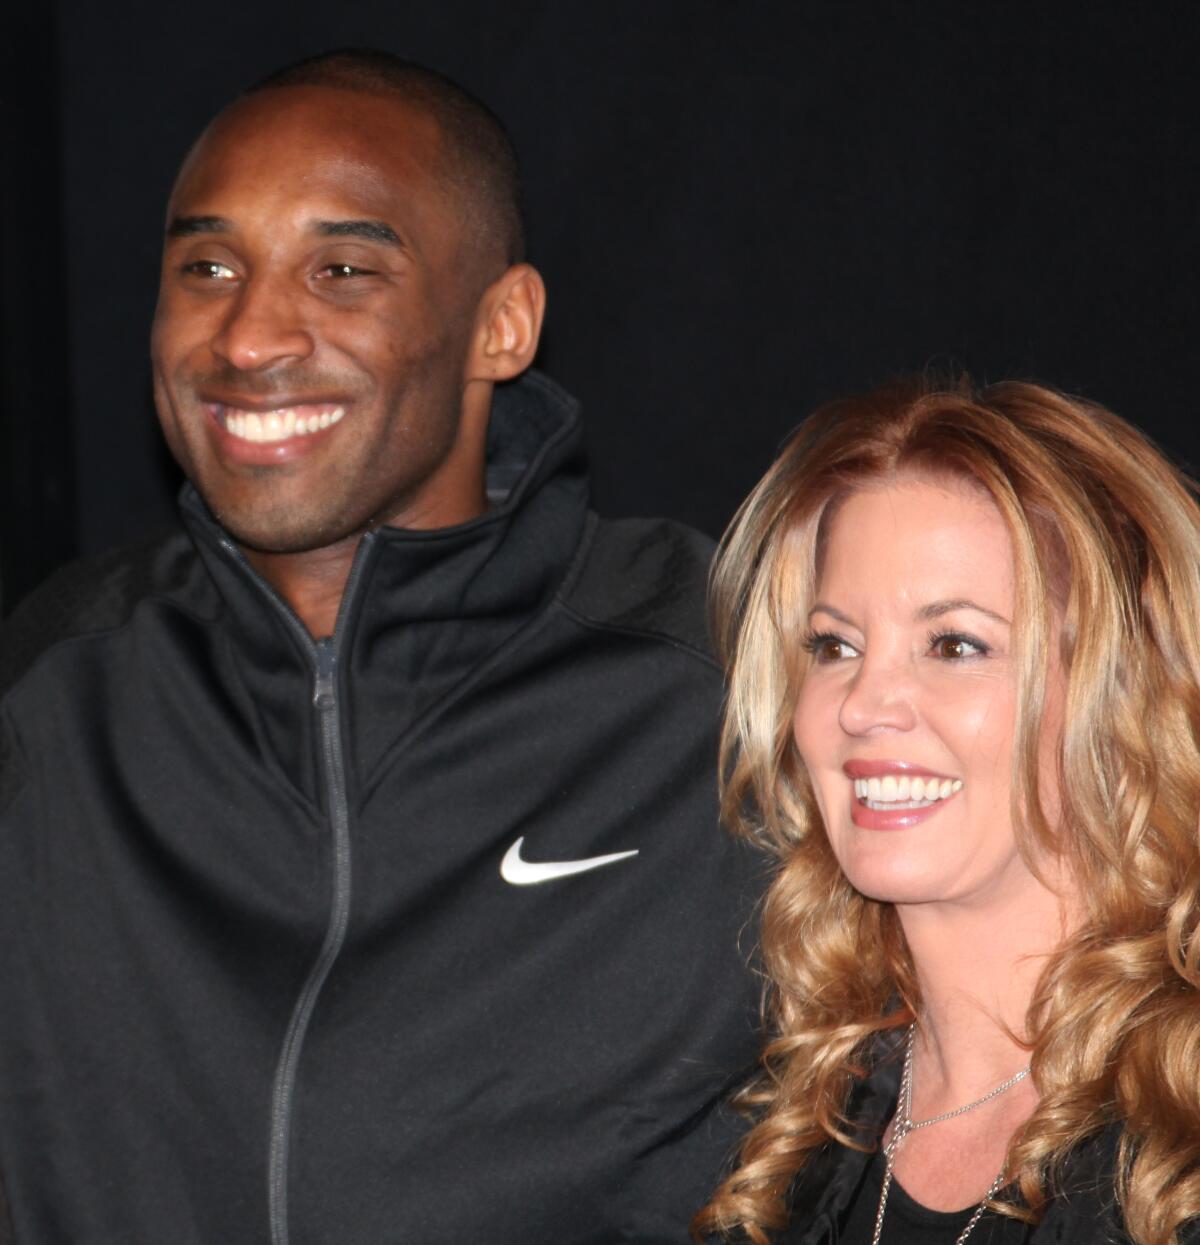 Kobe Bryant and Jeanie Buss attend his hand and footprint ceremony at Grauman's Chinese Theater in 2011.